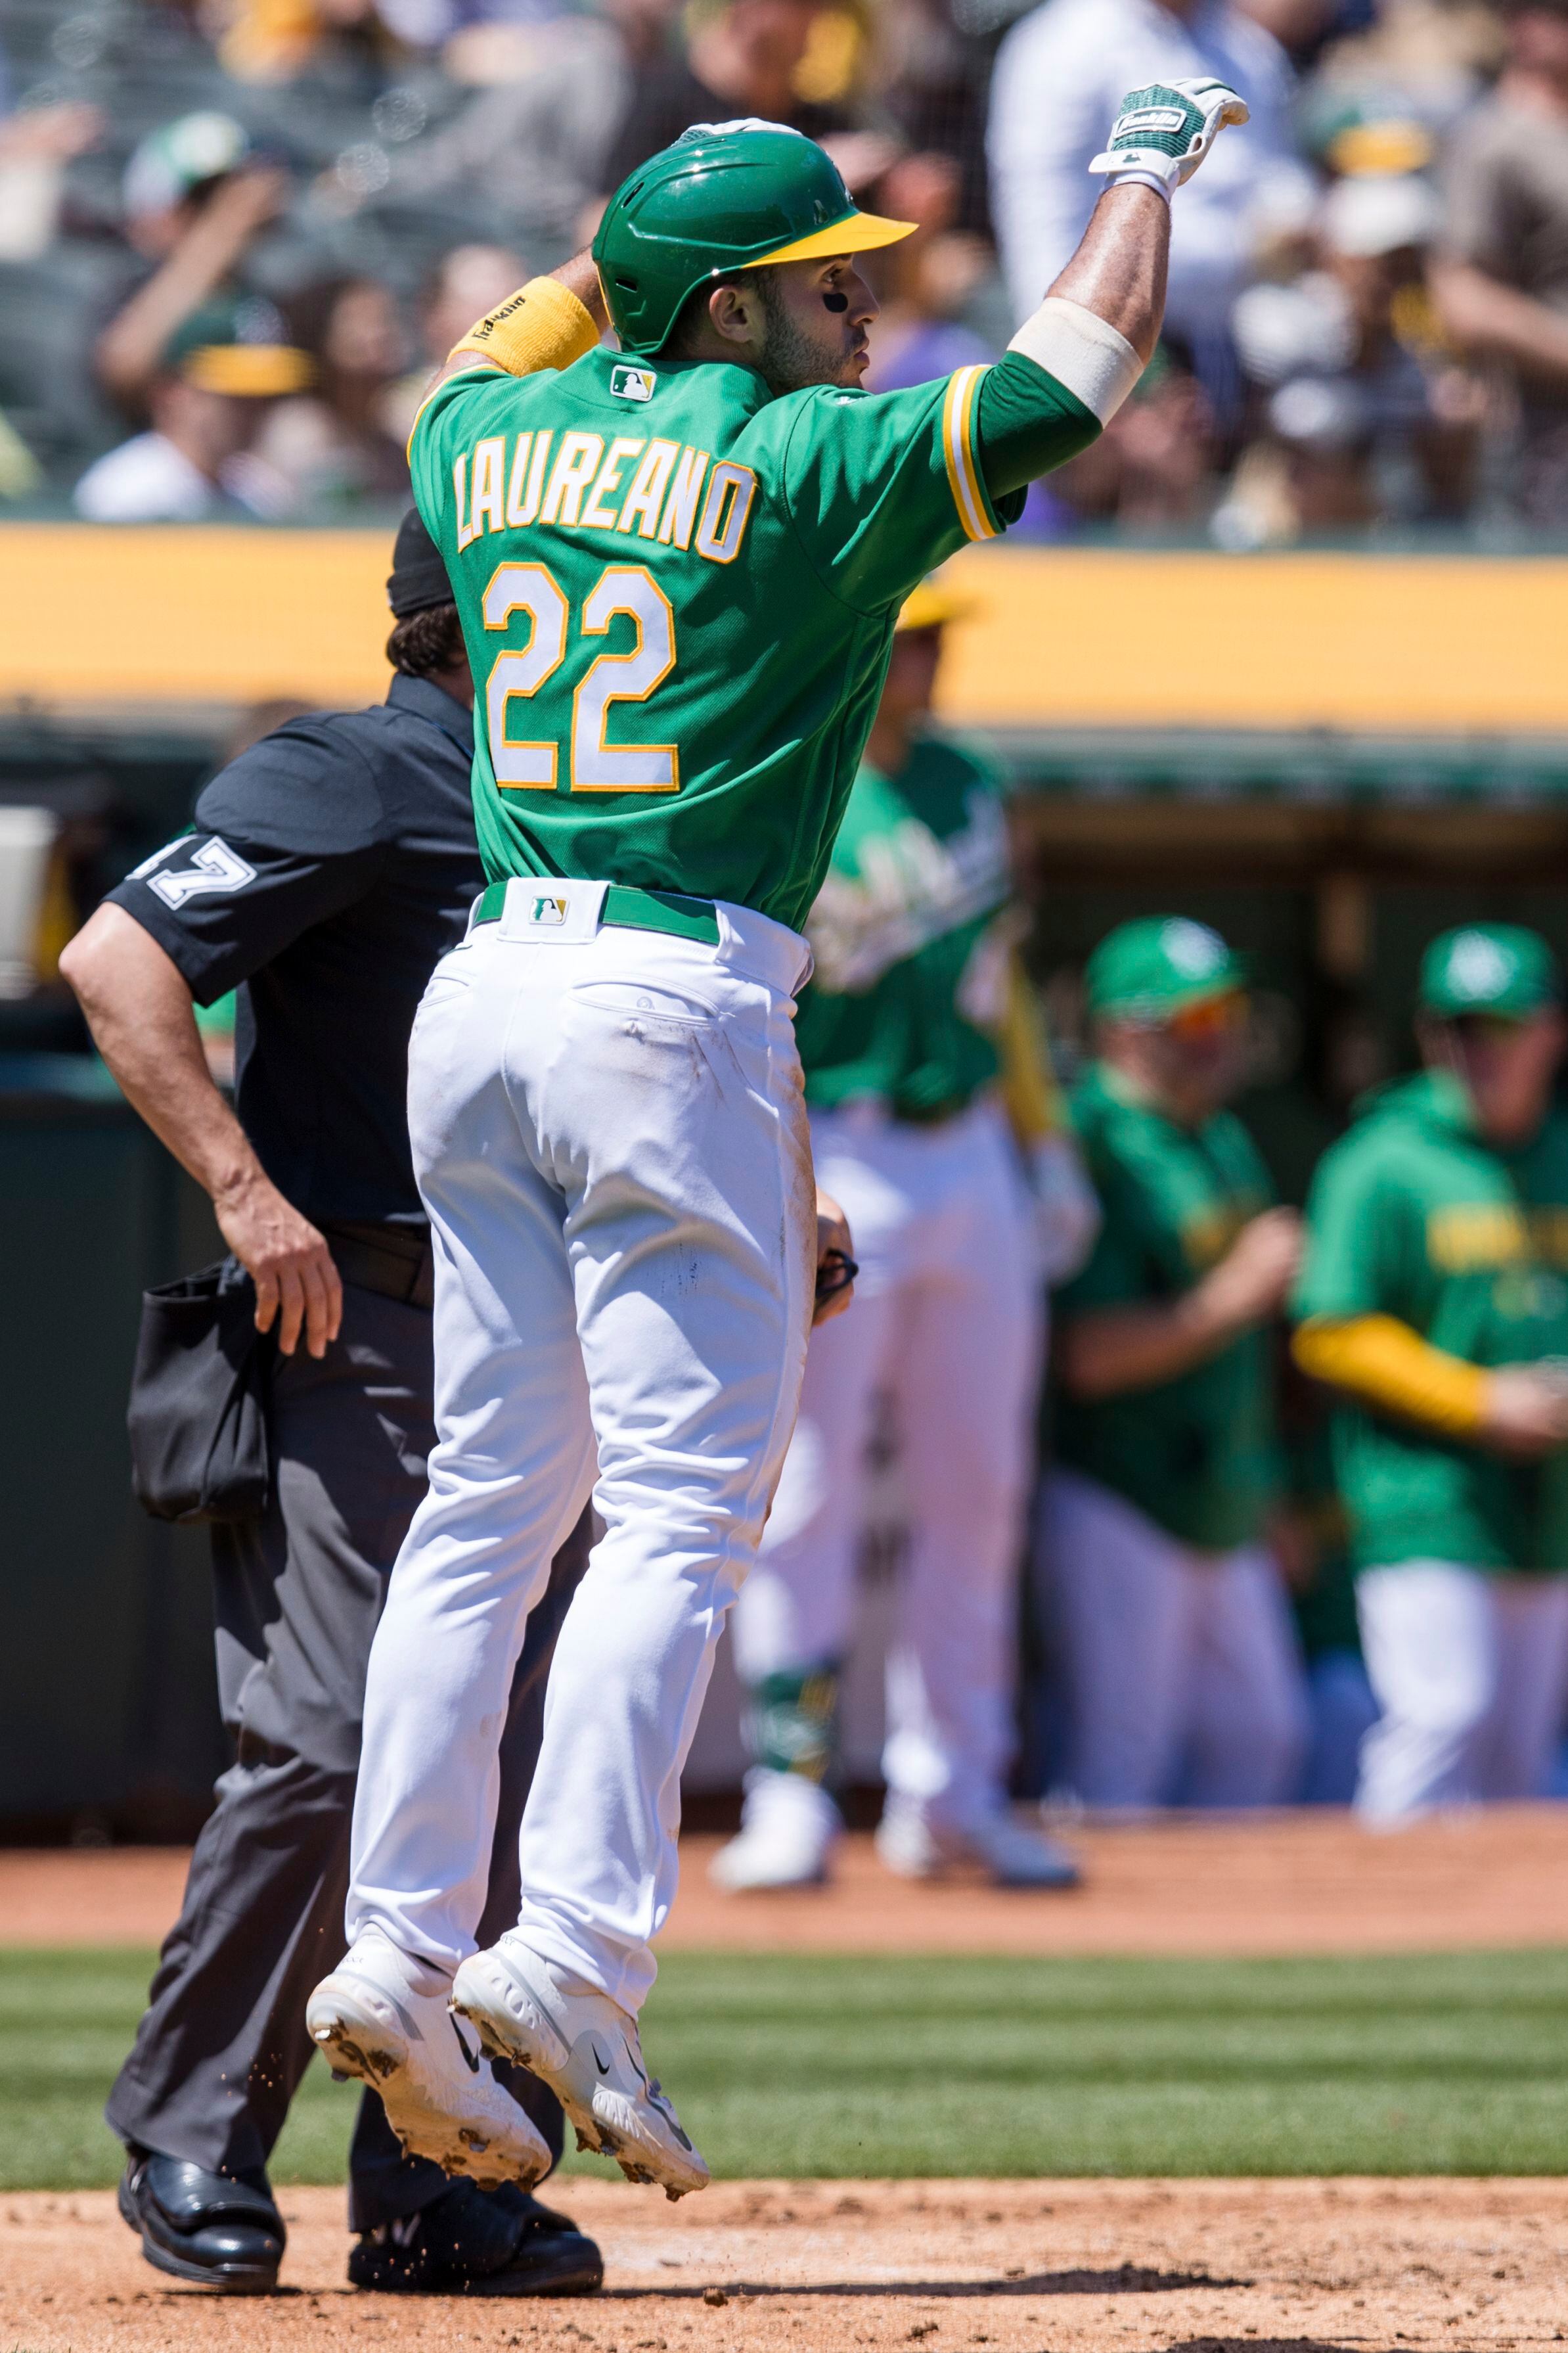 A's set record for starters not getting wins to begin season